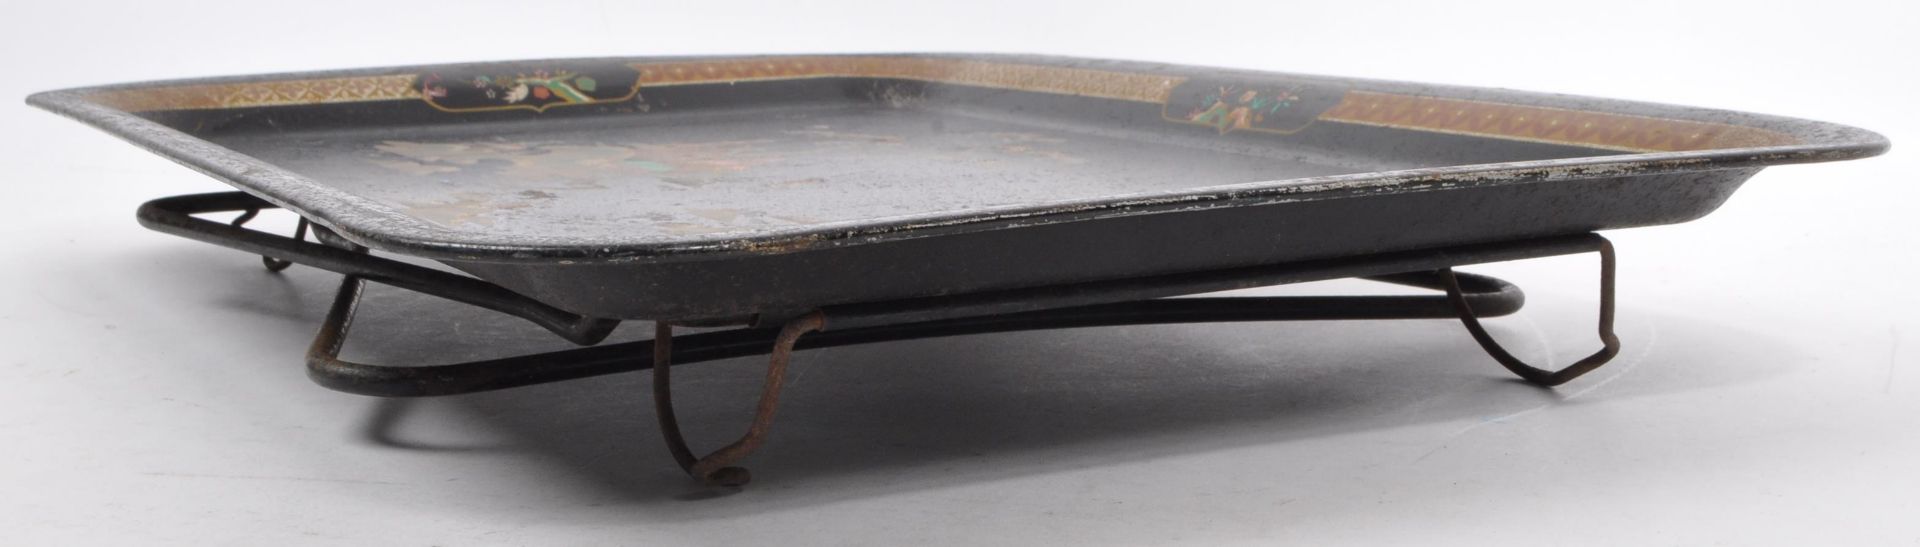 WORCESTER WARE - VINTAGE 20TH CENTURY ASIAN SERVING TRAY - Image 6 of 7